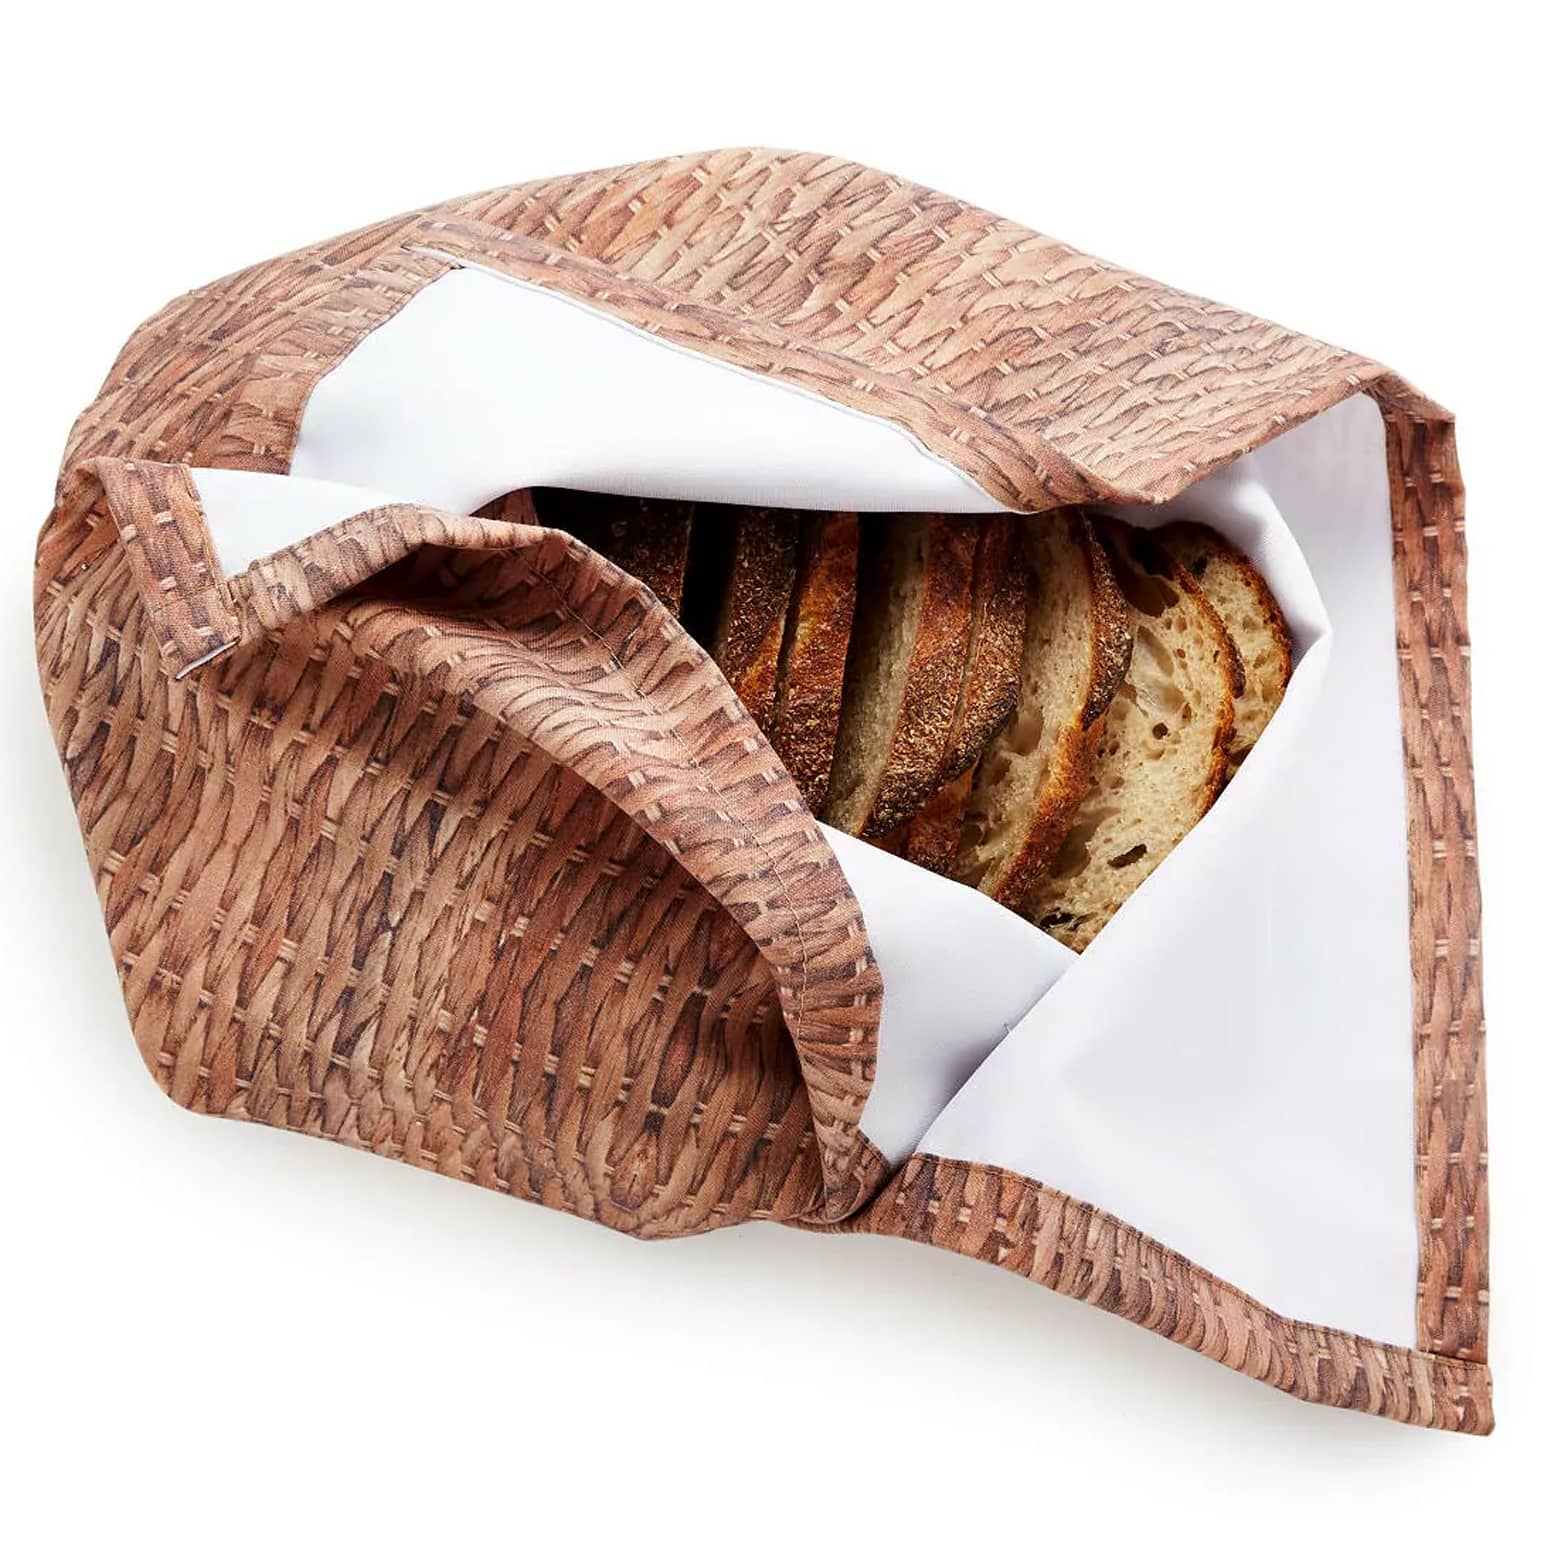 Bread Basket Warming Blanket With Flaxseed-Filled Heat Pack